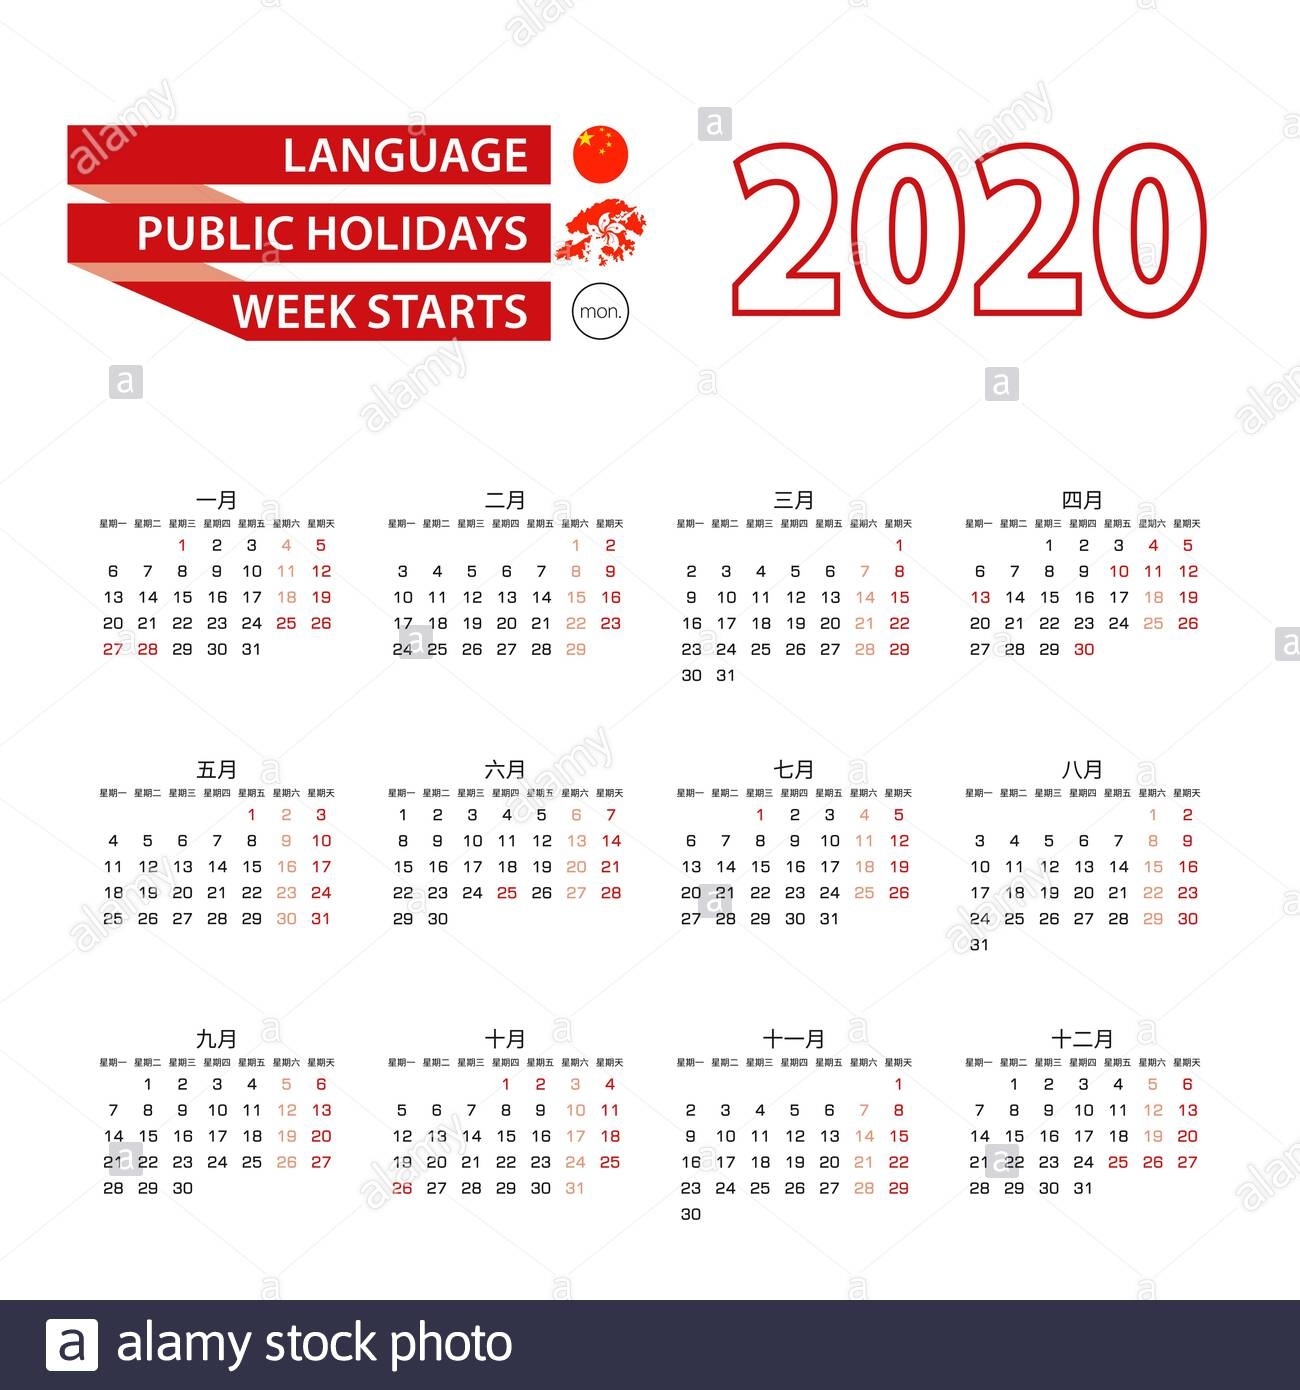 Calendar 2020 In Chinese Language With Public Holidays The Exceptional 2020 Calendar Hong Kong Download